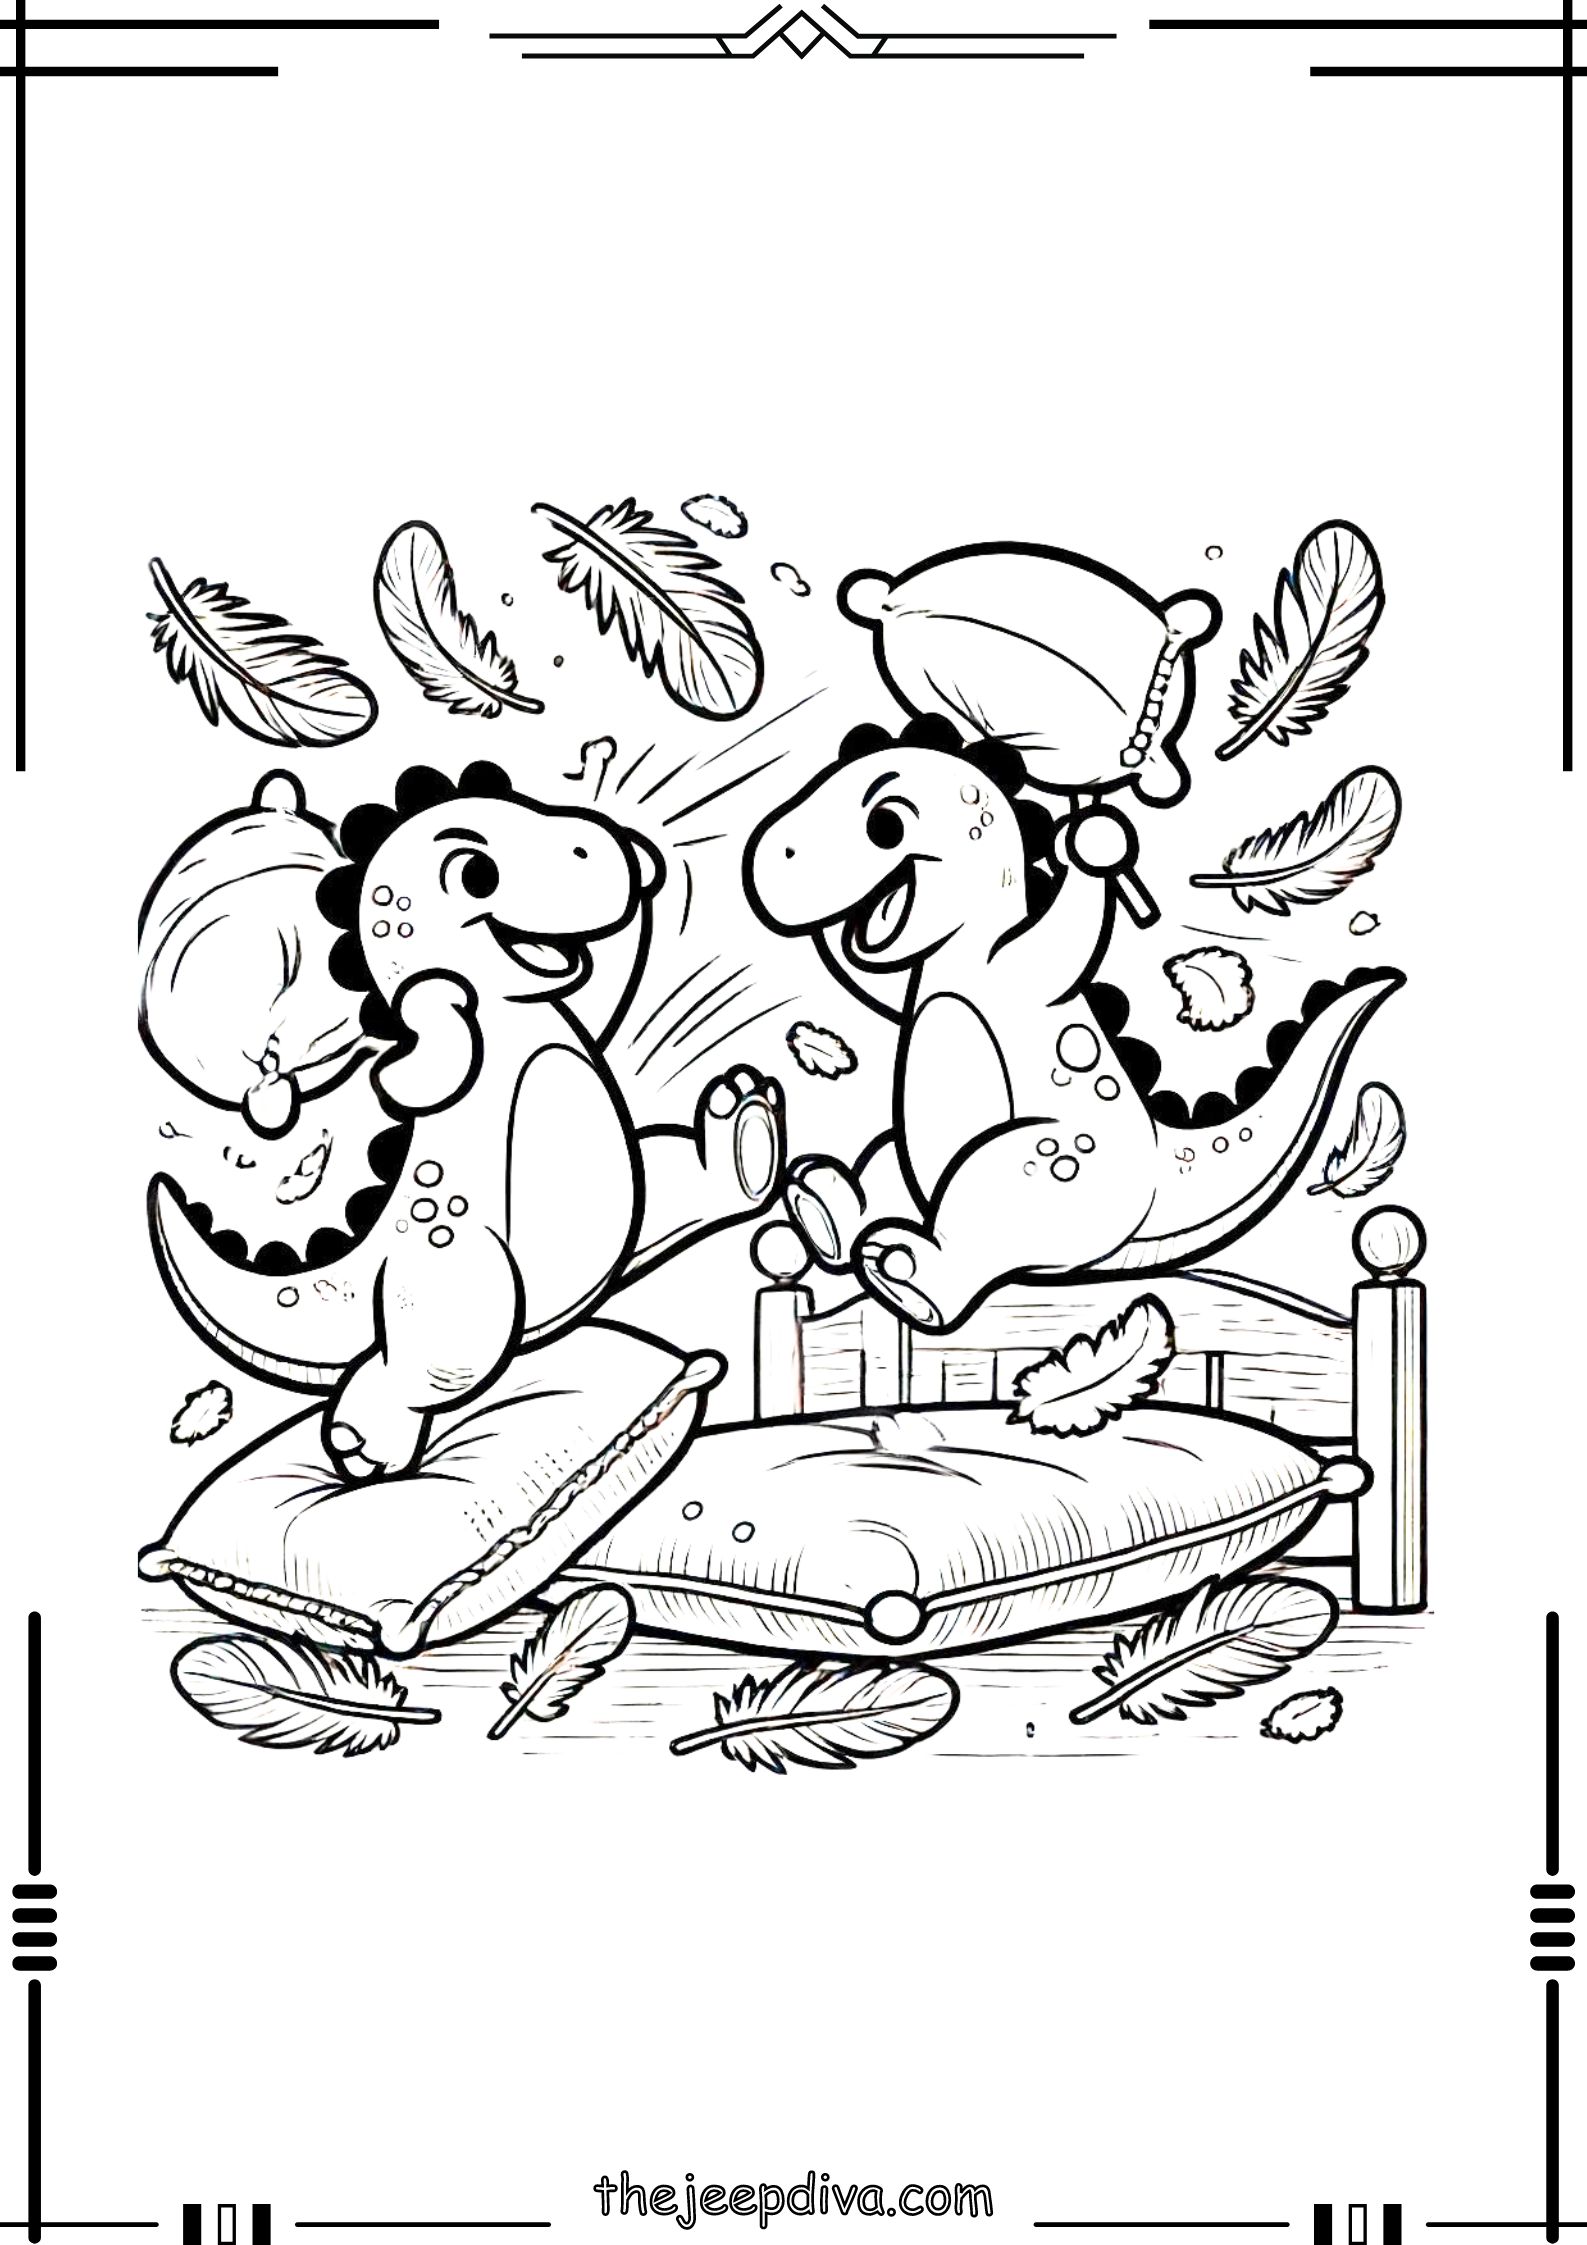 Dinosaur-Colouring-Pages-Hard-5